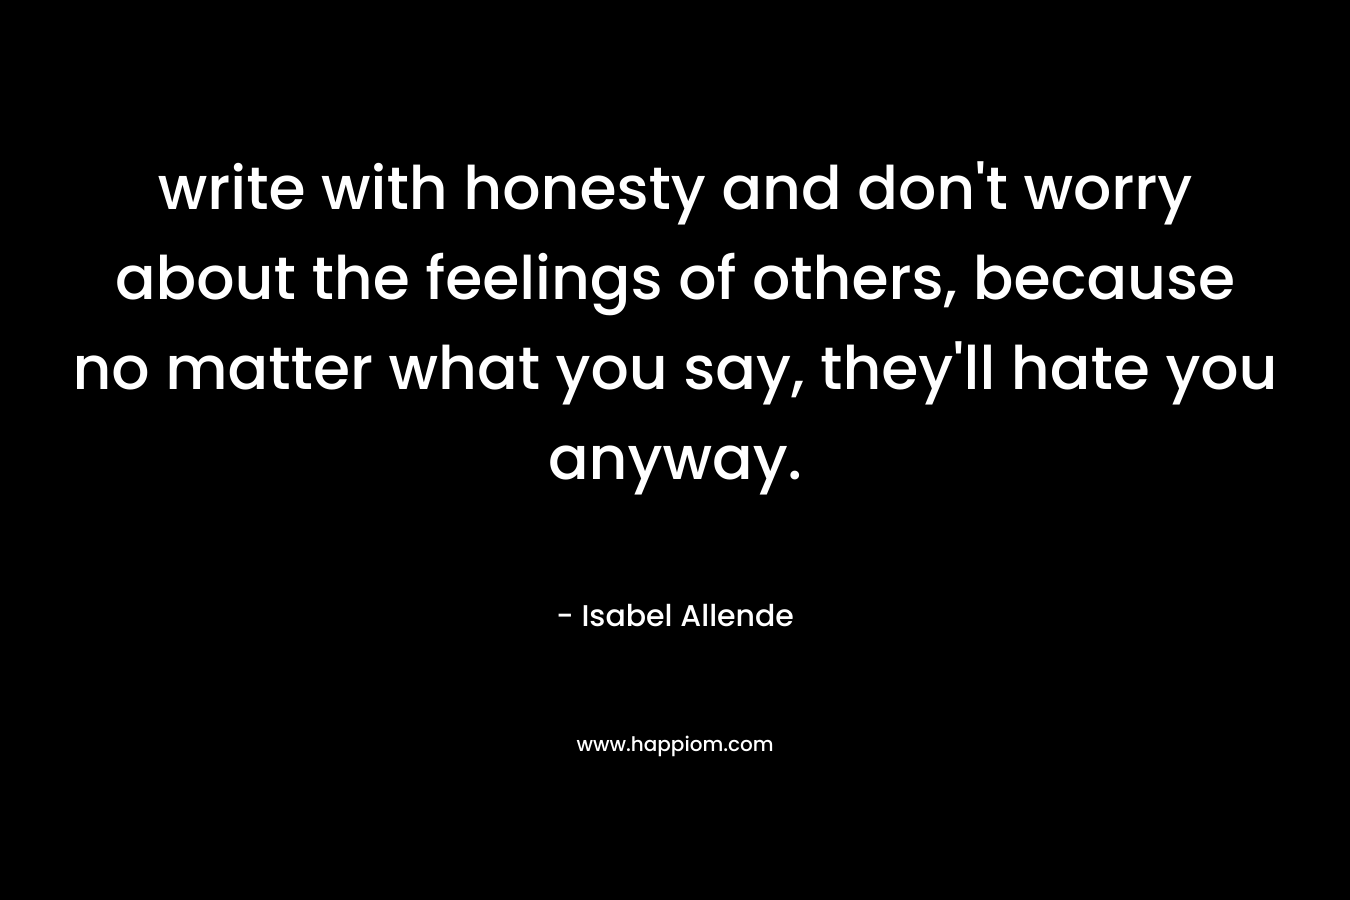 write with honesty and don’t worry about the feelings of others, because no matter what you say, they’ll hate you anyway. – Isabel Allende